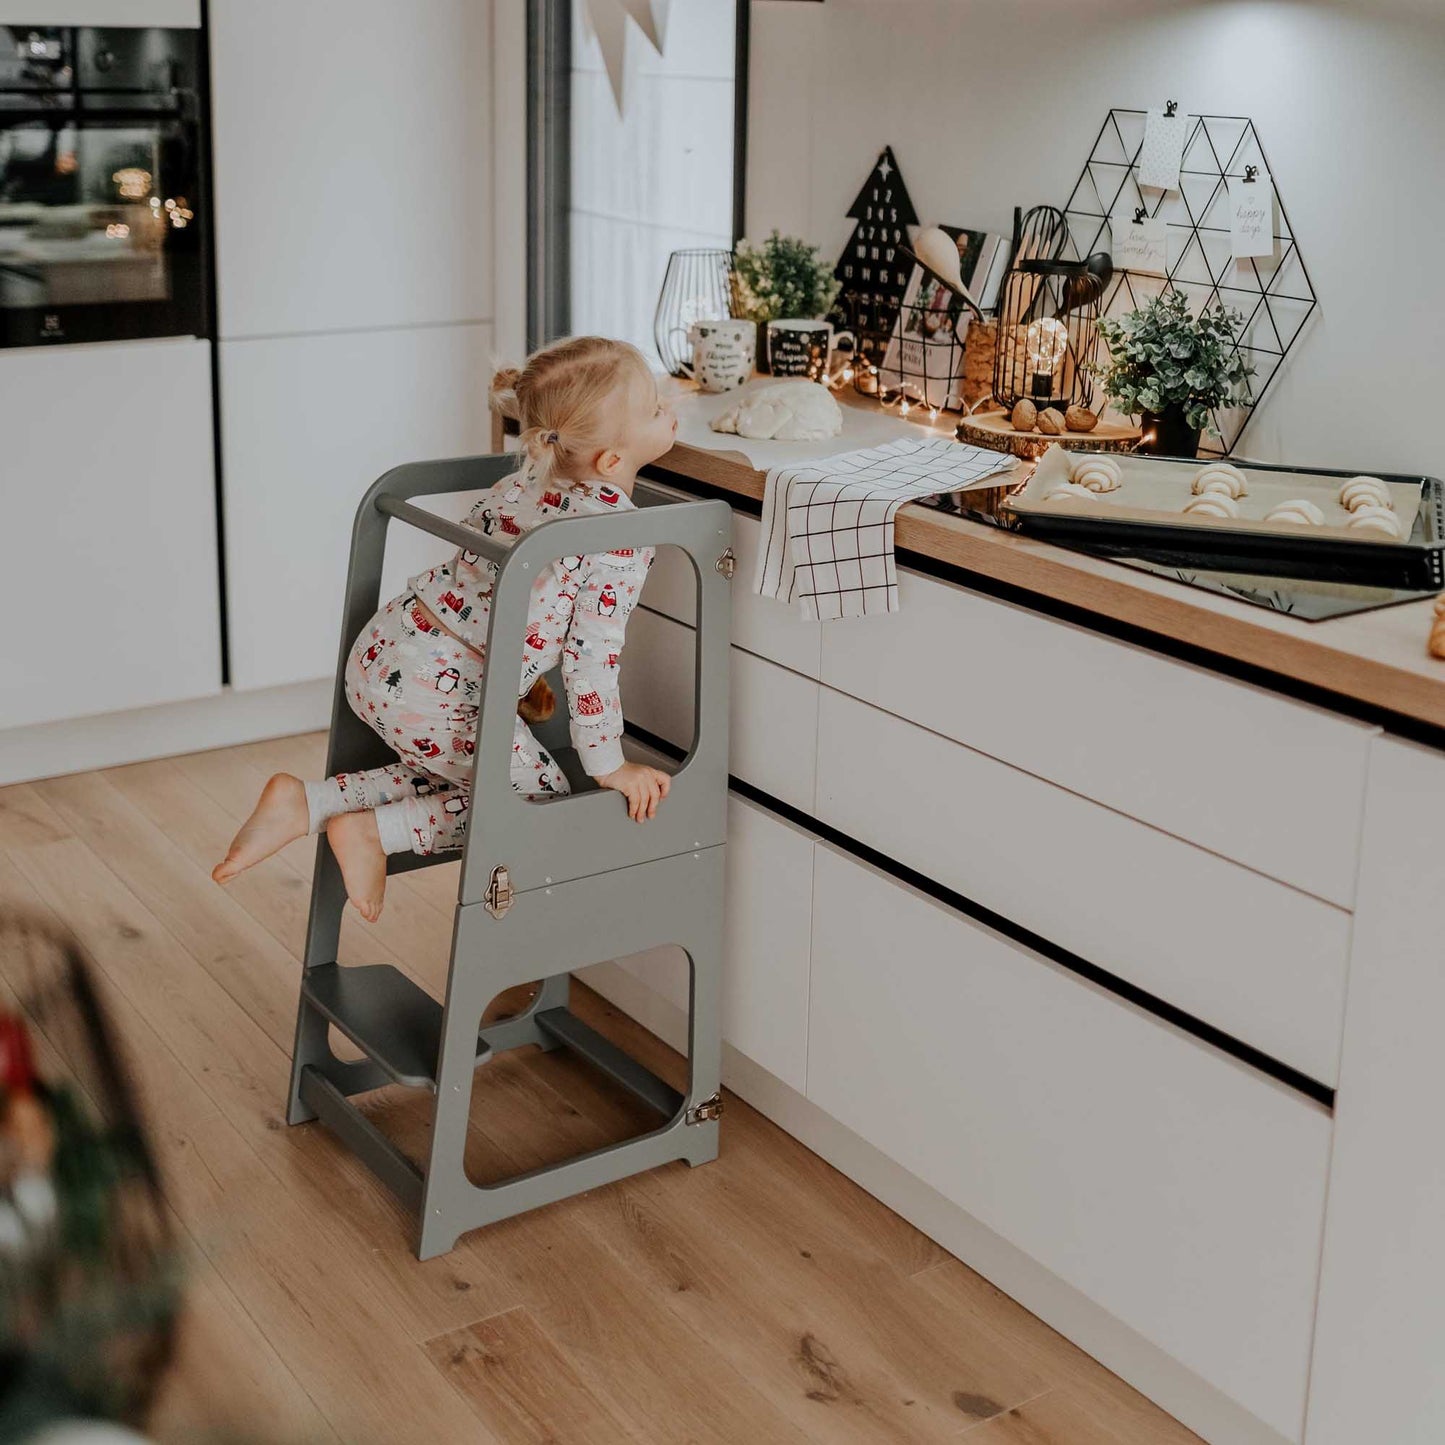 A toddler in pajamas standing on a 2-in-1 Convertible kitchen tower - table and chair in a kitchen.